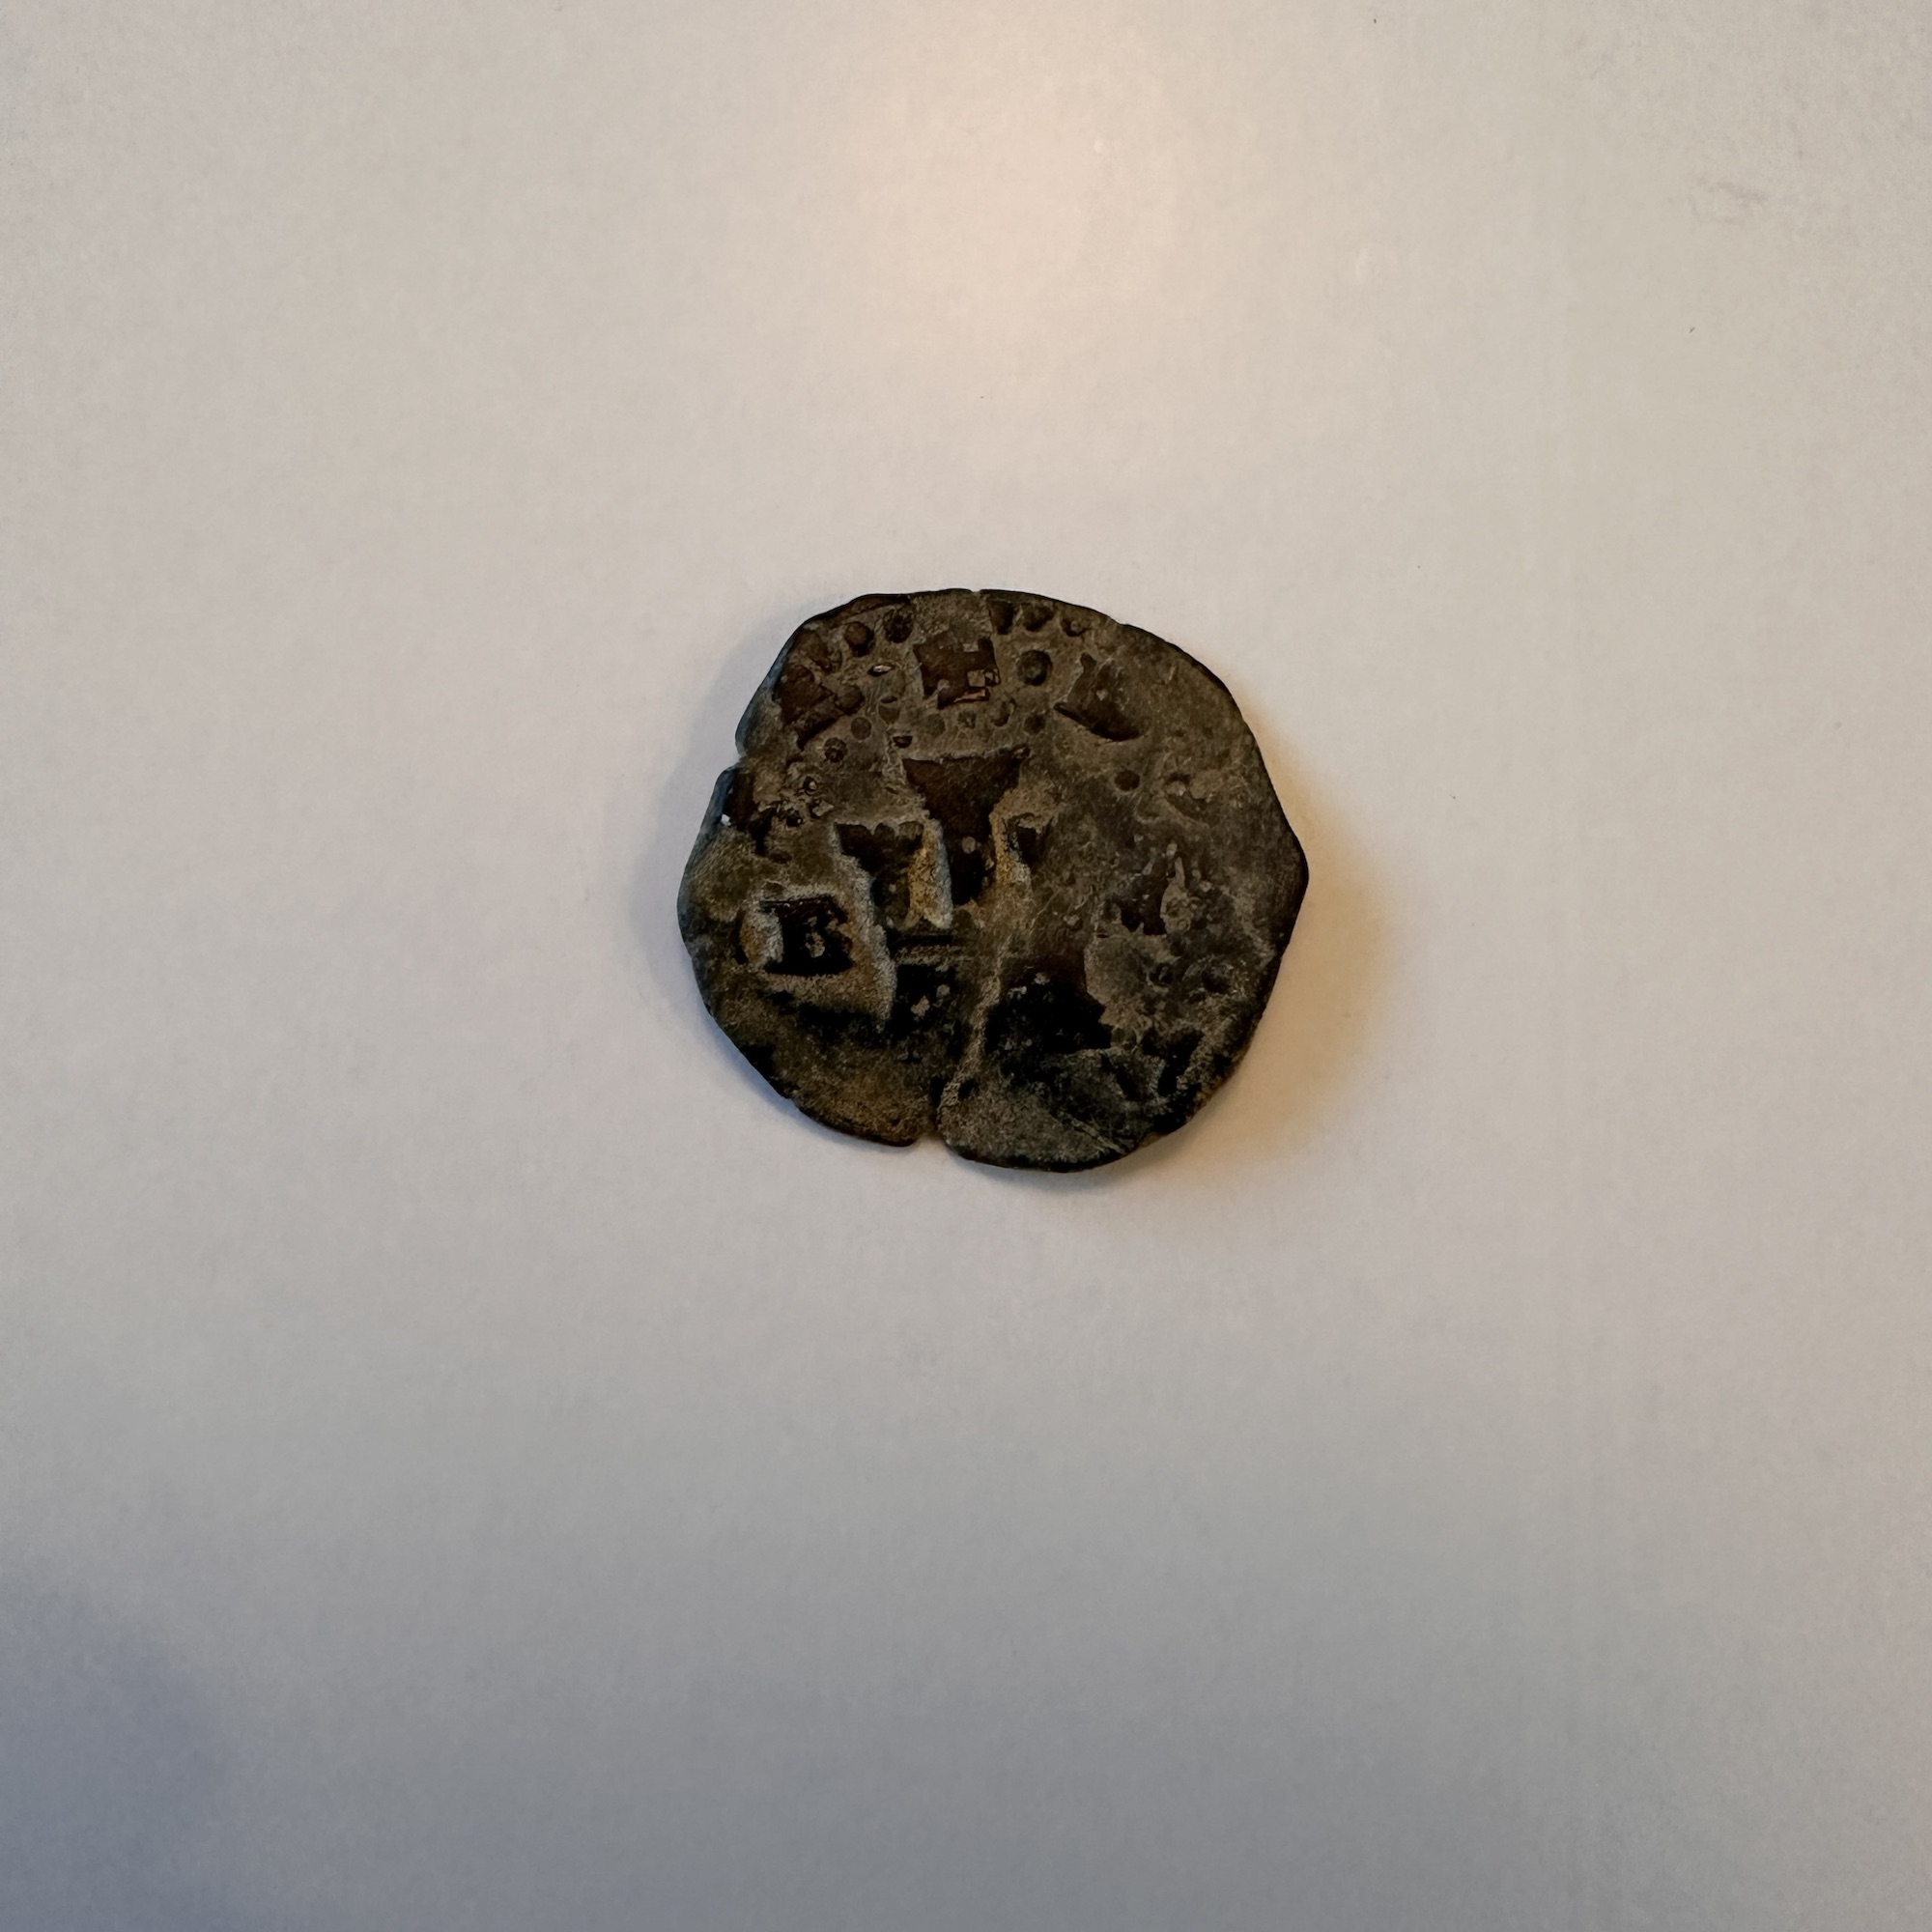 Pirate cob, 1600's well detailed bronze spanish coin